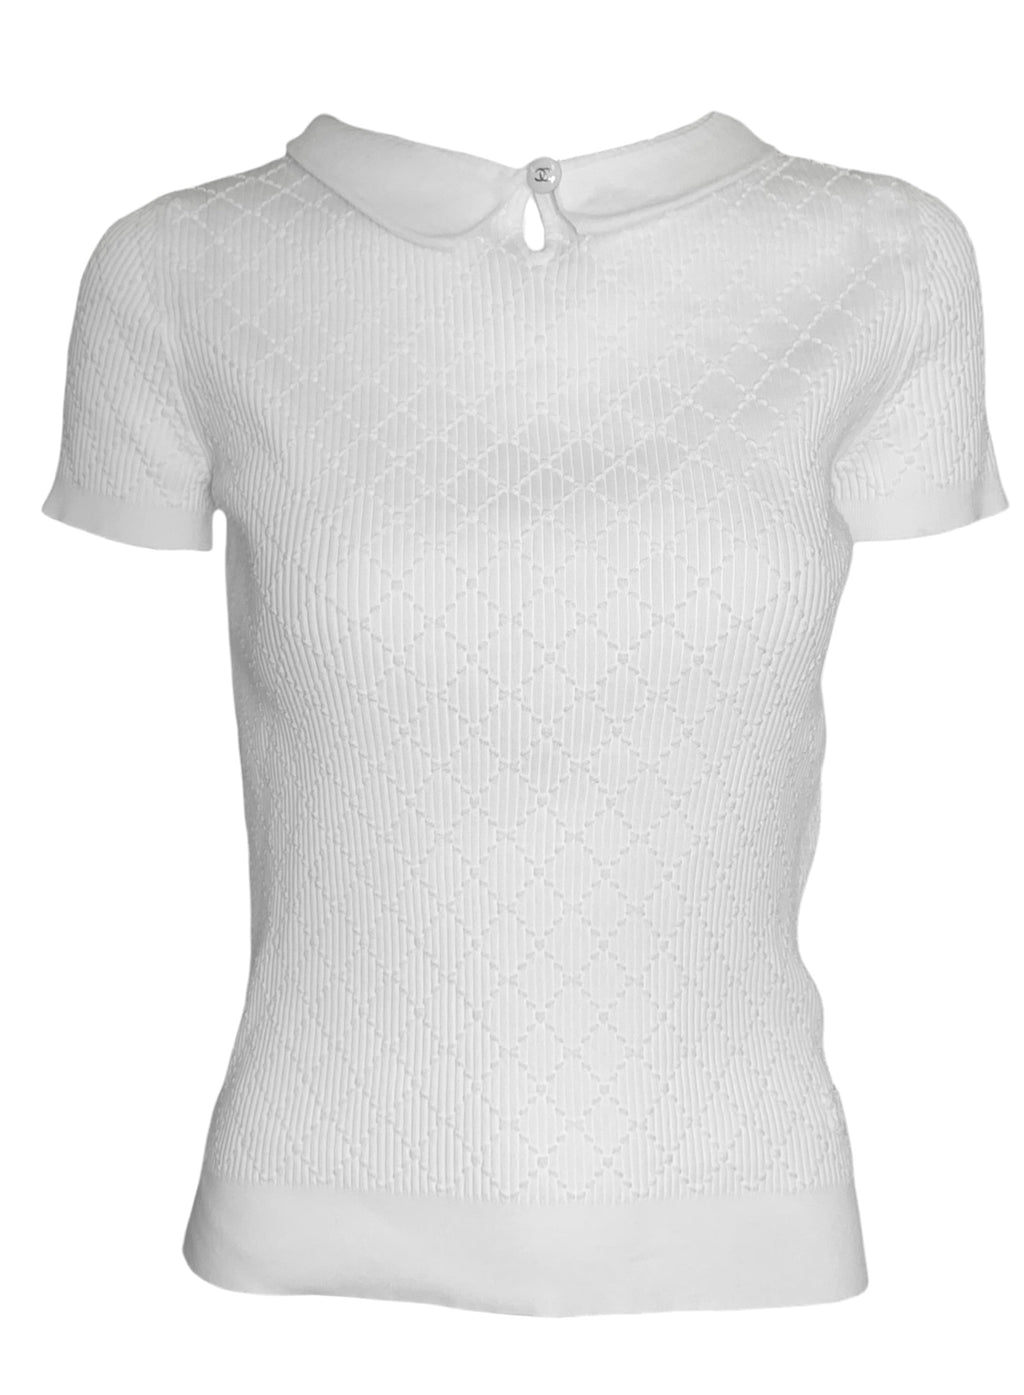 Chanel 2000s White Ribbed Cotton Pullover Top with Short Sleeves FRONT 1 of 7